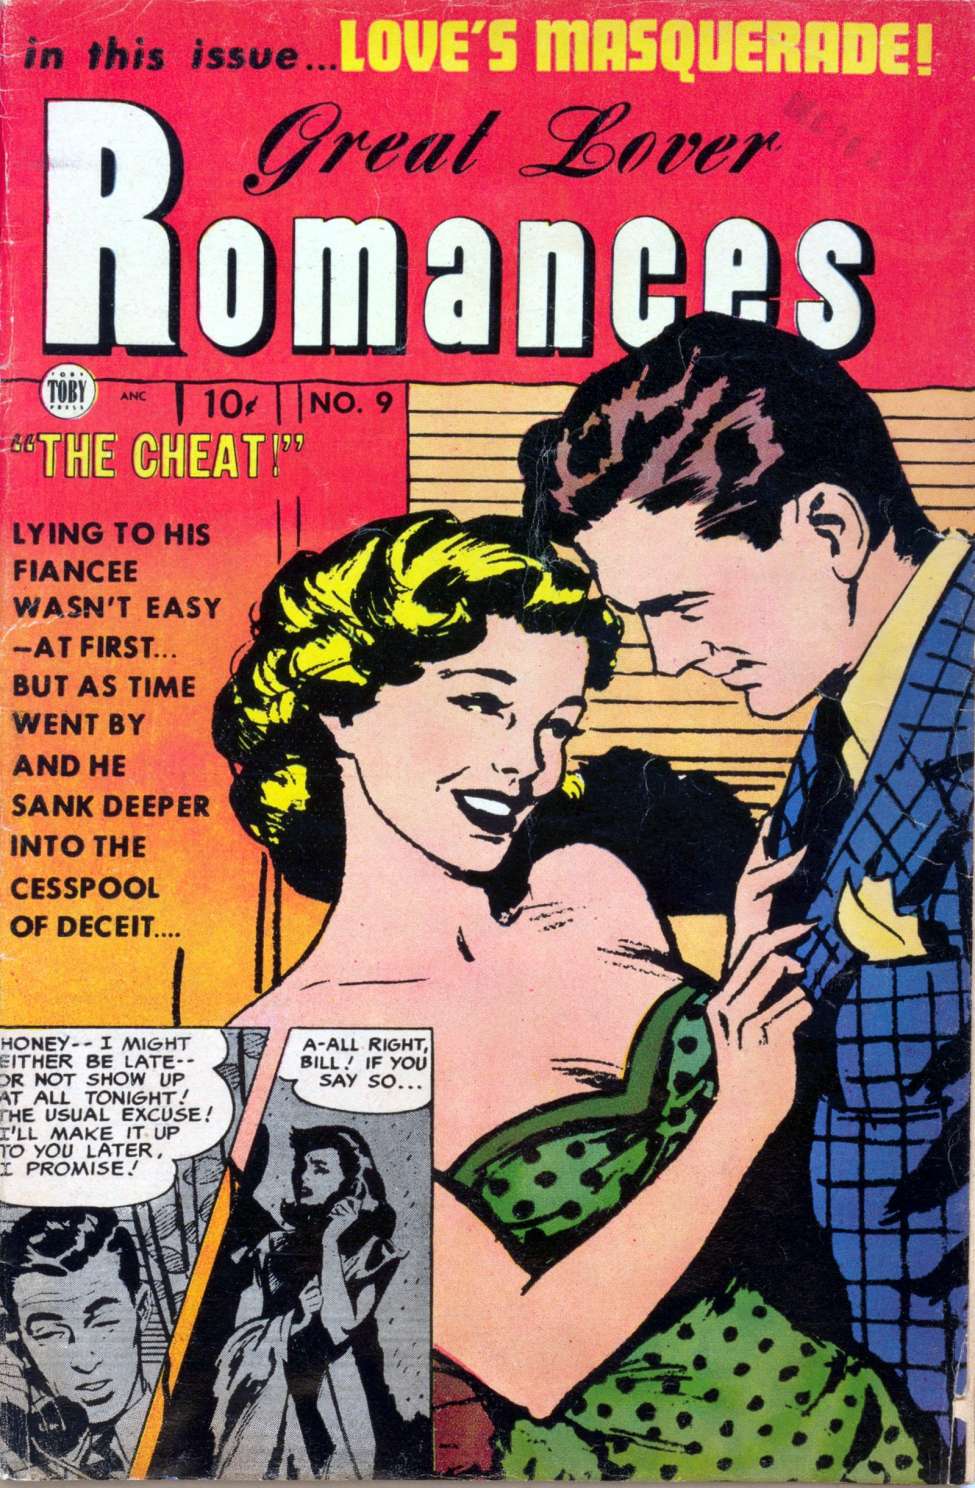 Comic Book Cover For Great Lover Romances 9